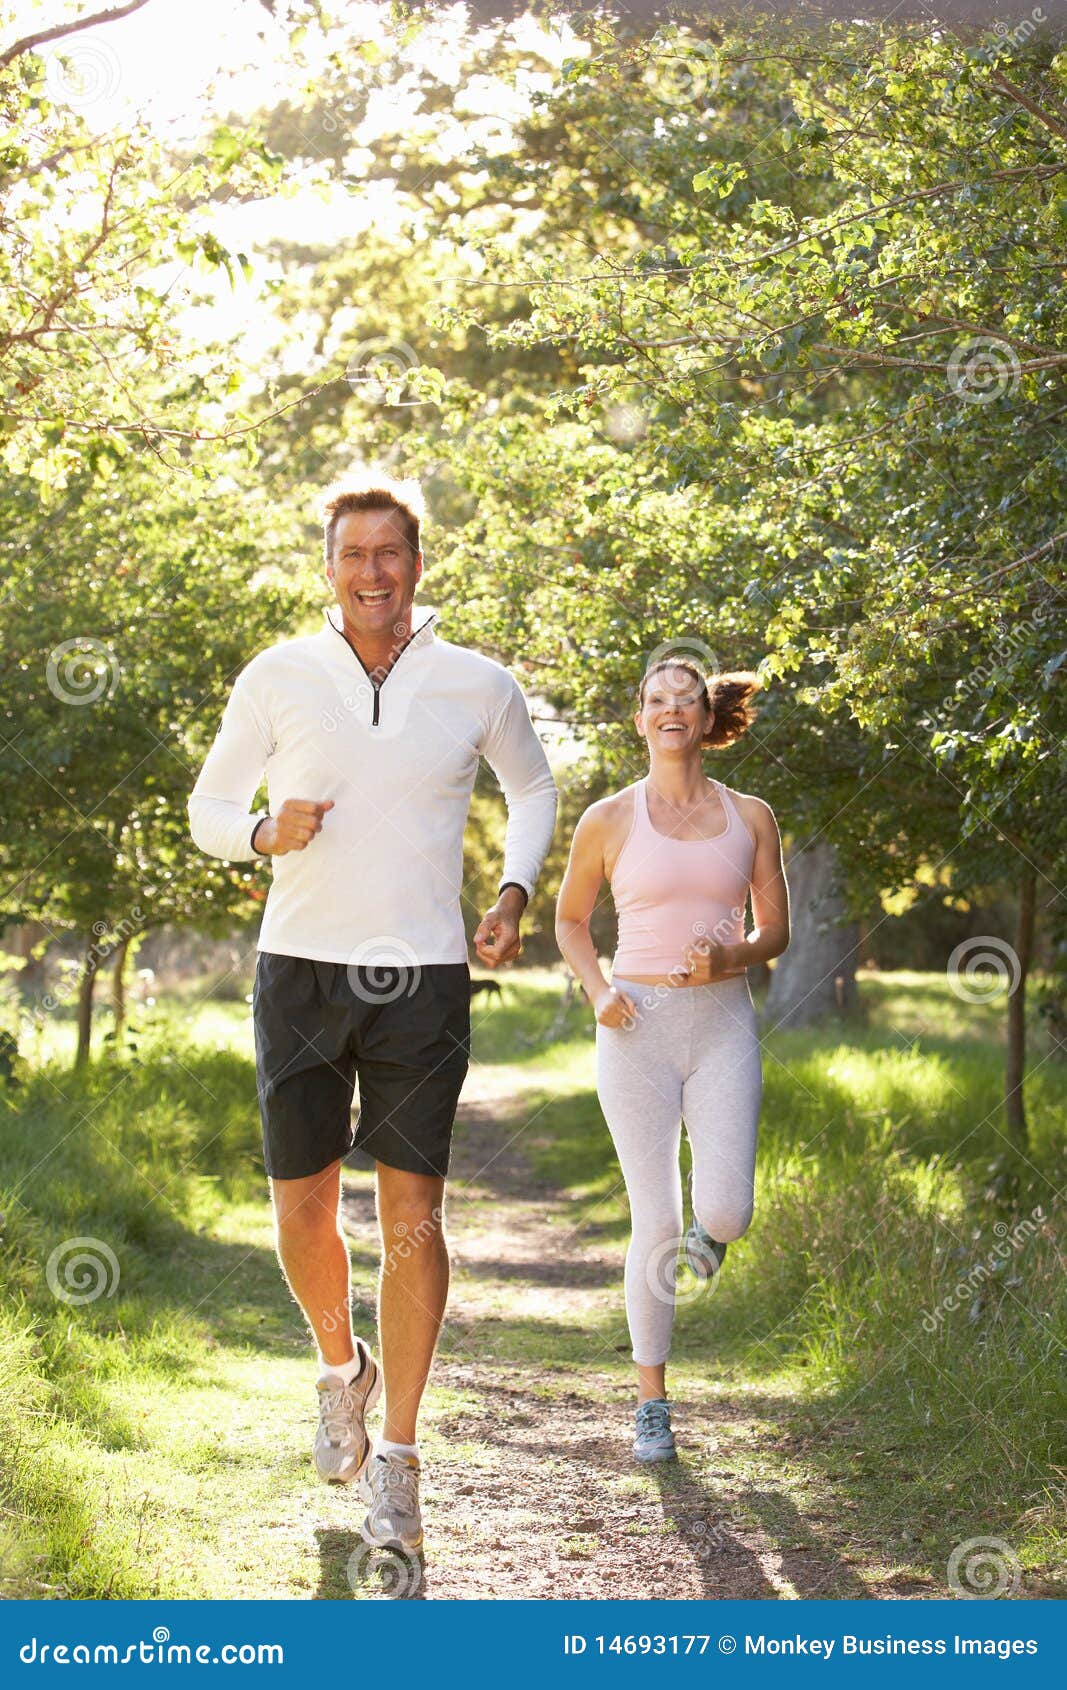 middle aged couple jogging in park